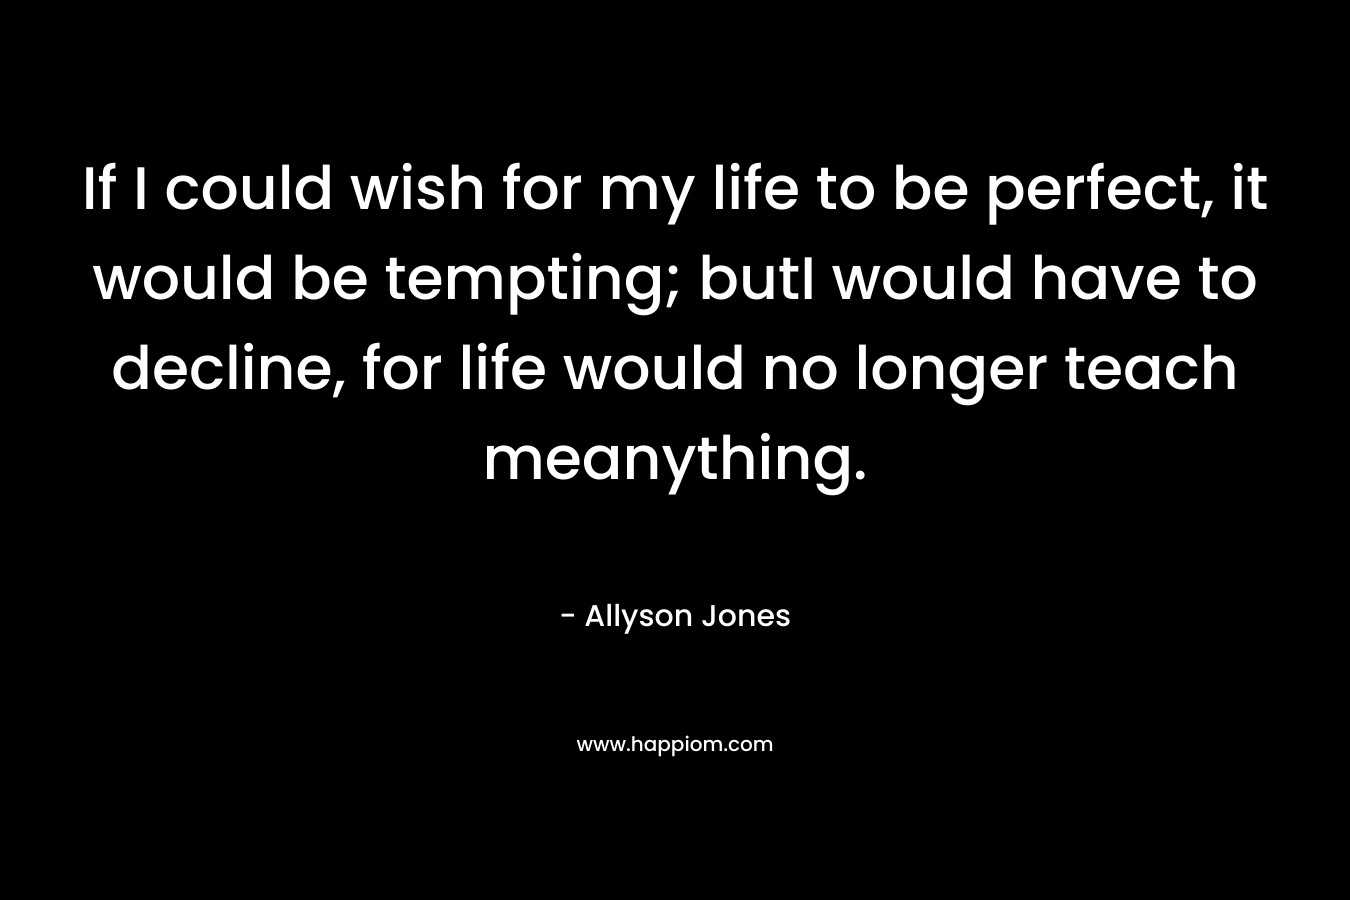 If I could wish for my life to be perfect, it would be tempting; butI would have to decline, for life would no longer teach meanything. – Allyson Jones